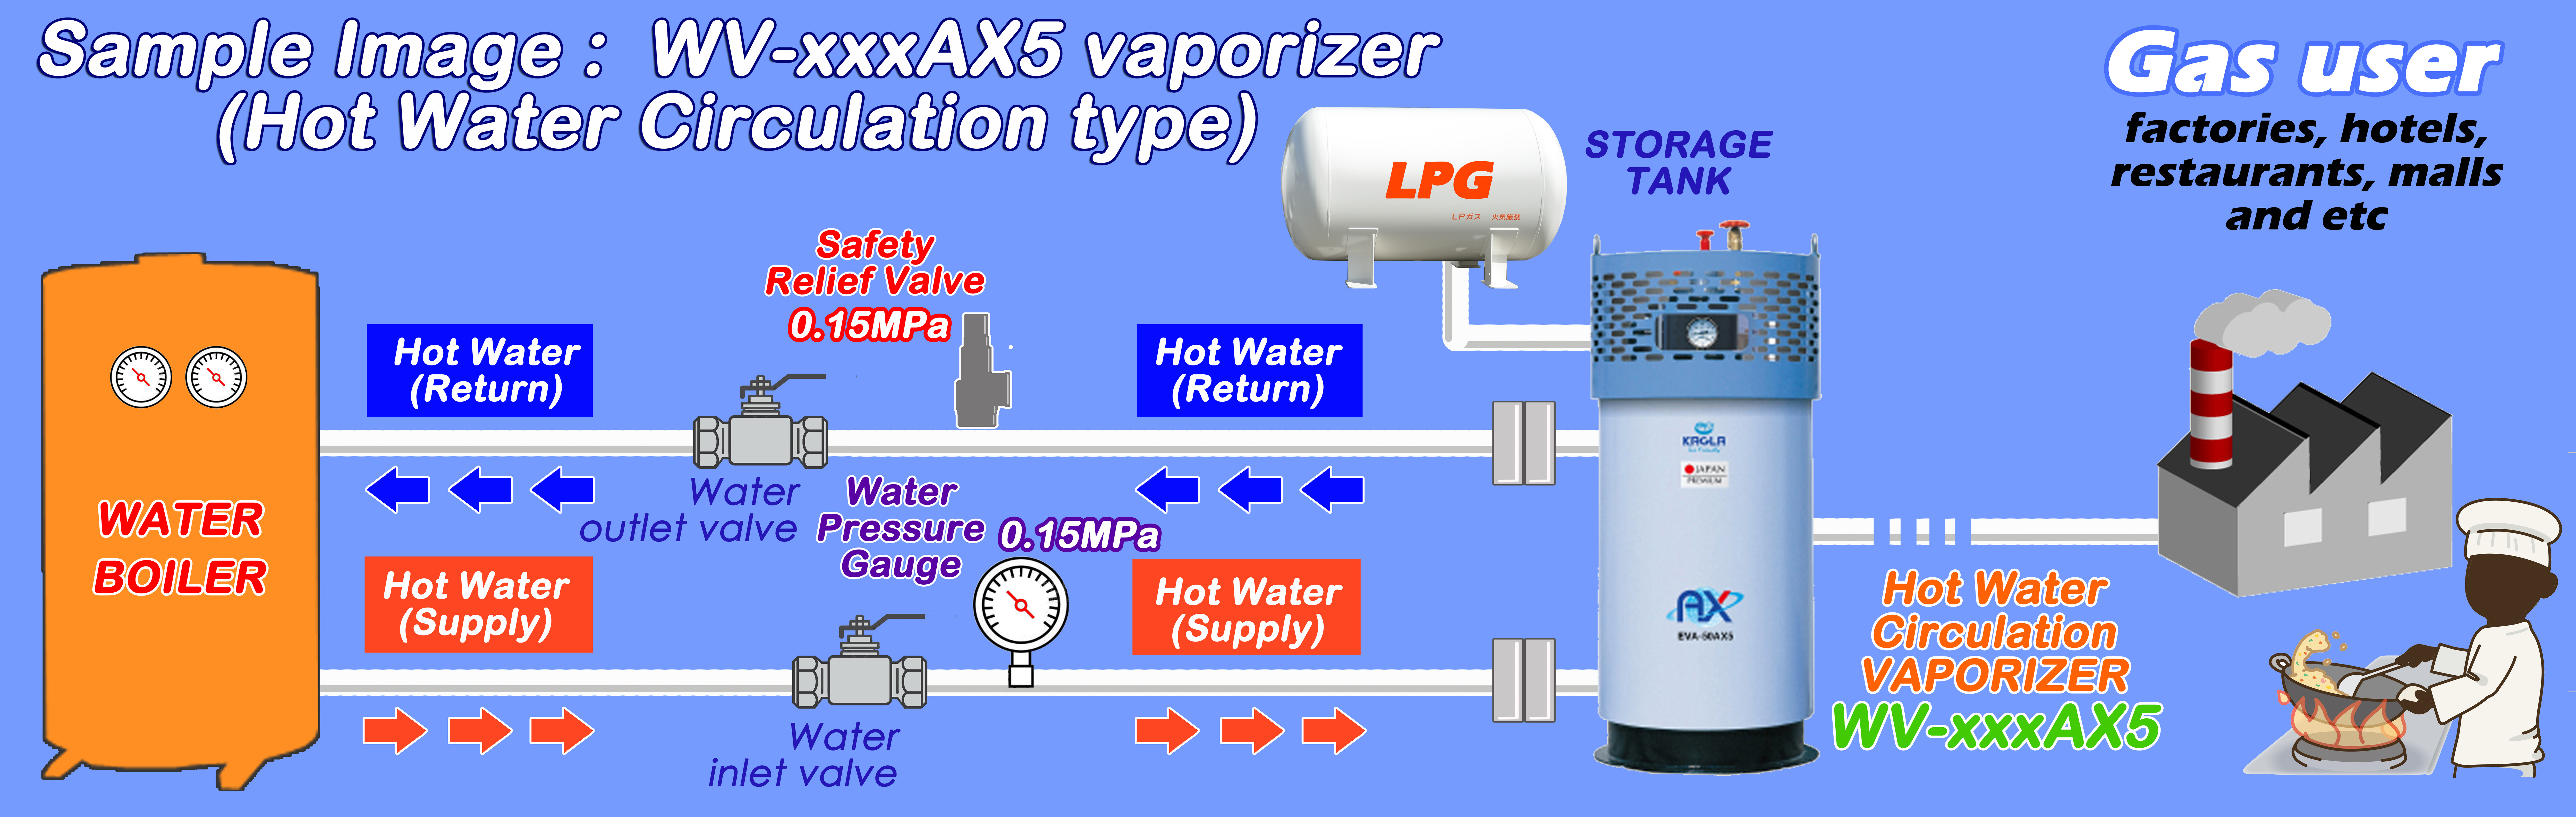 Installation image of WV-AX5 vaporizer with water boiler as a heat source